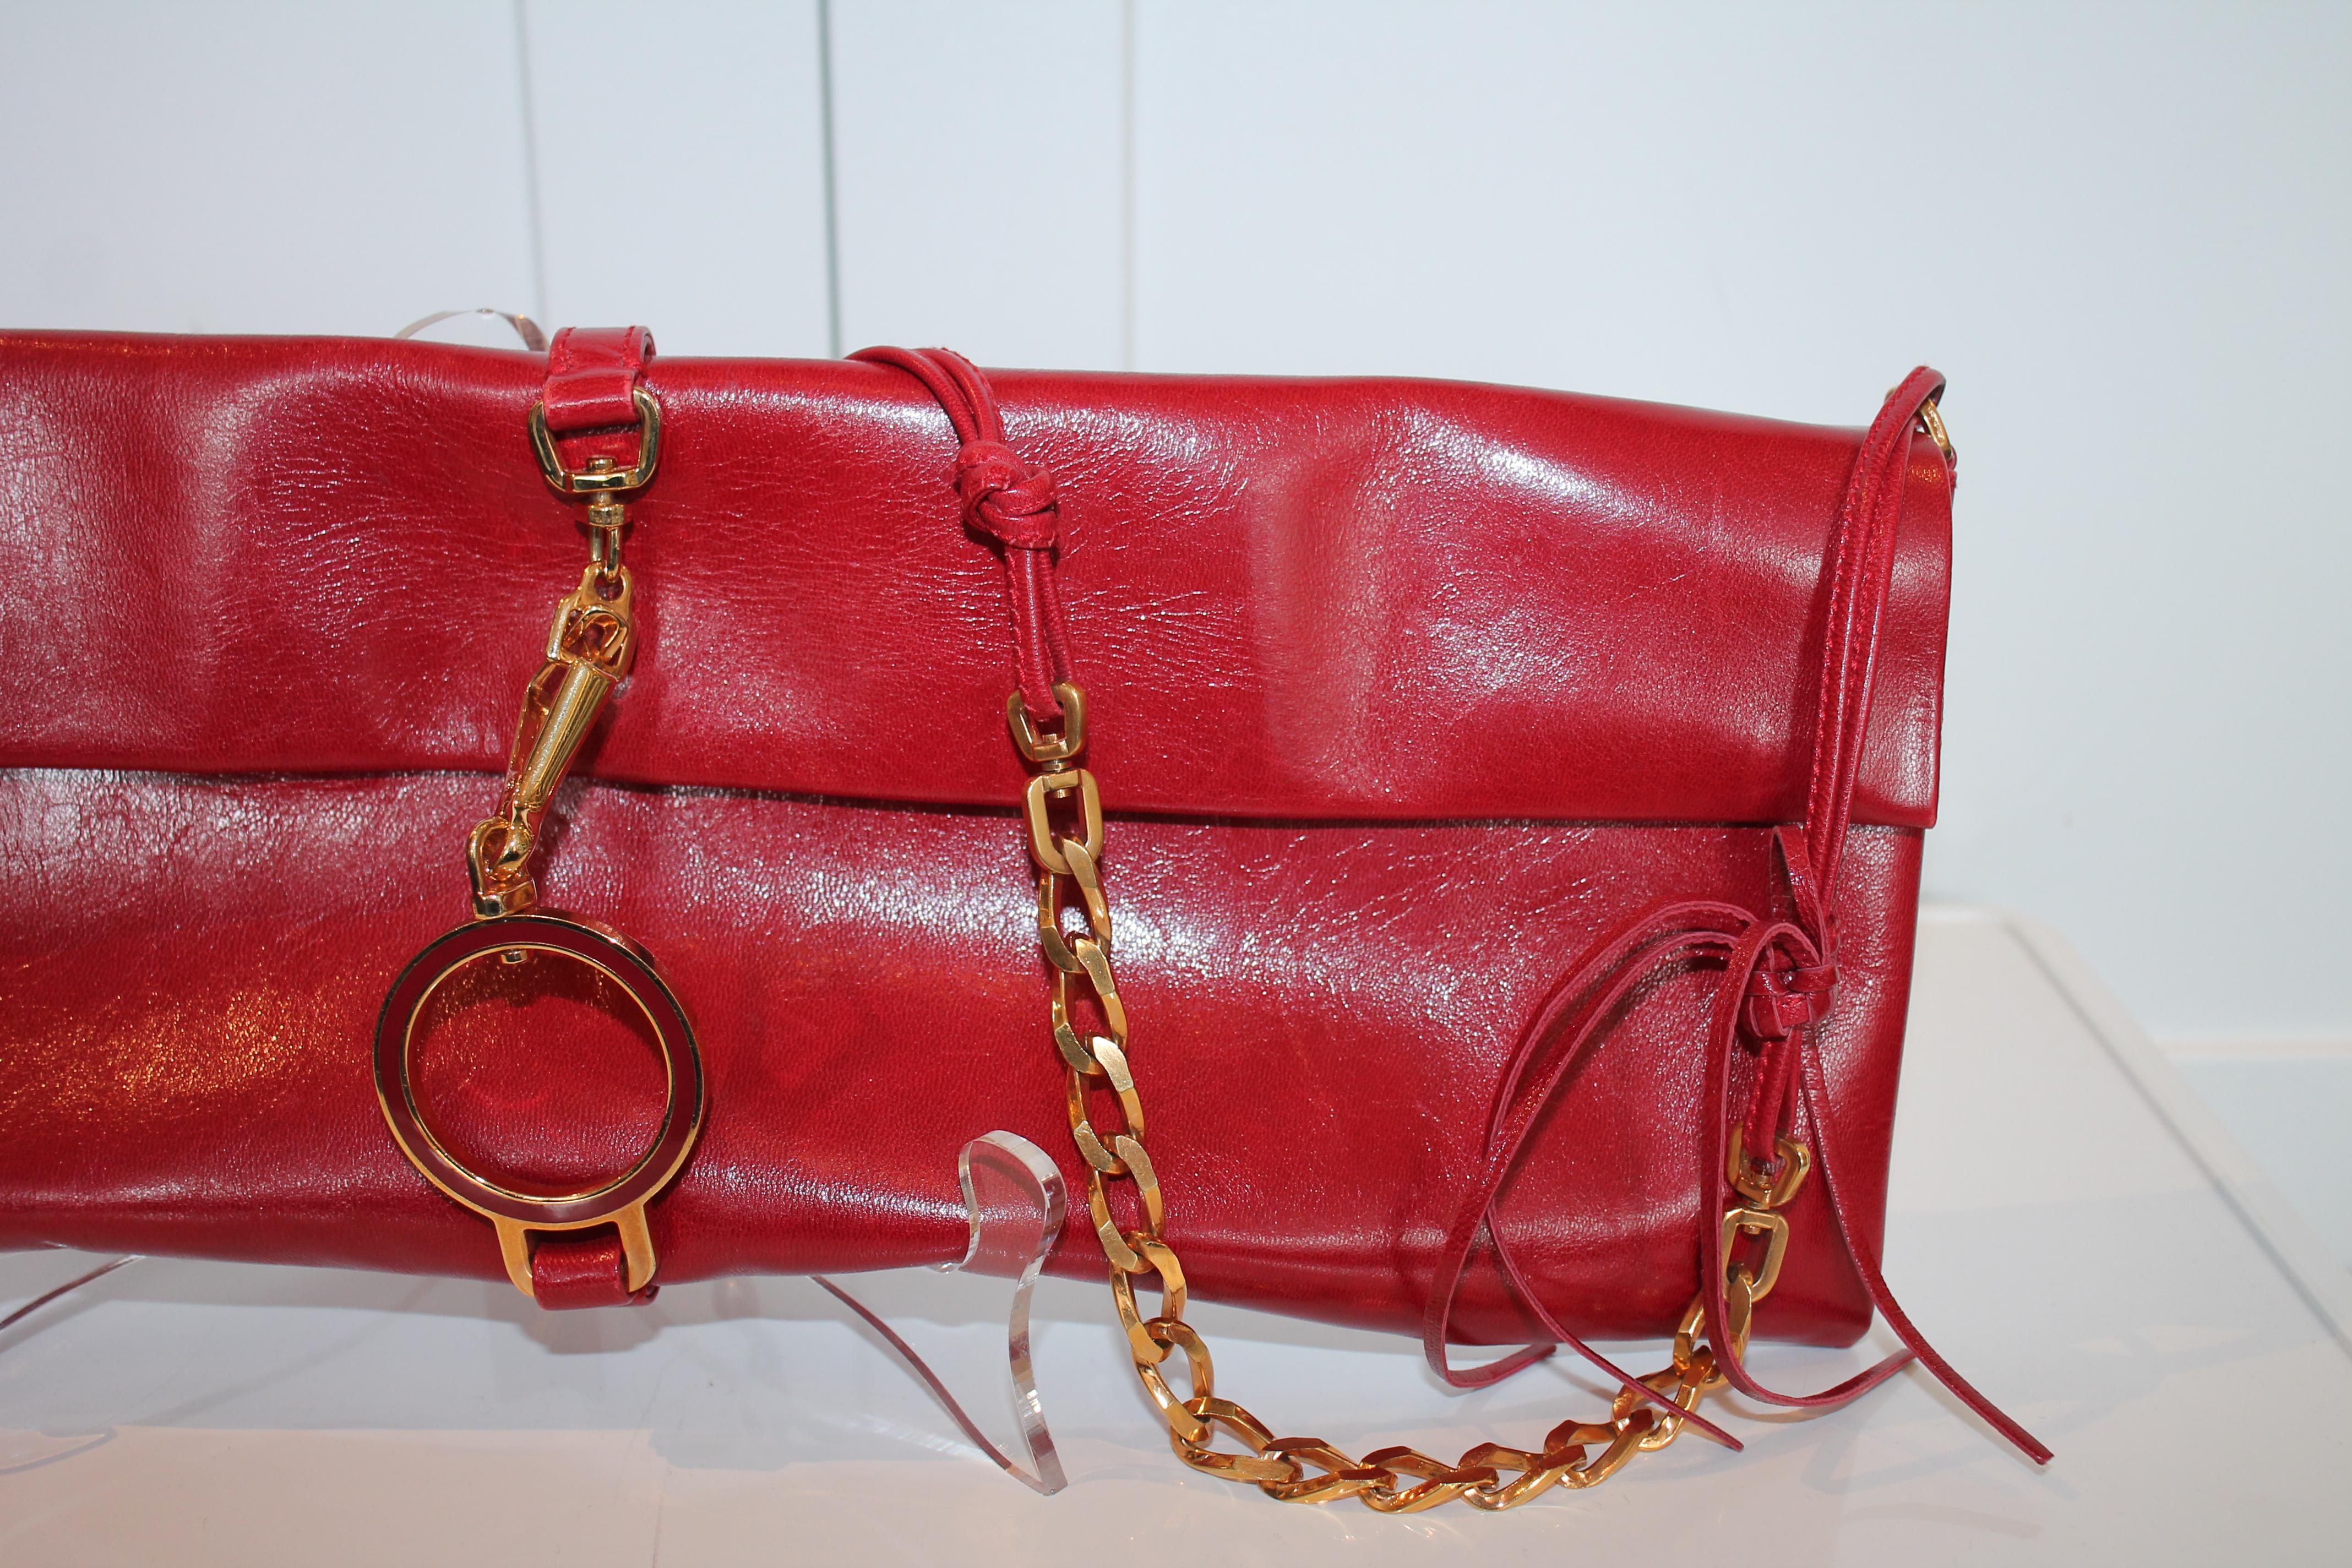 Prada Leather Clutch In Excellent Condition For Sale In Roslyn, NY